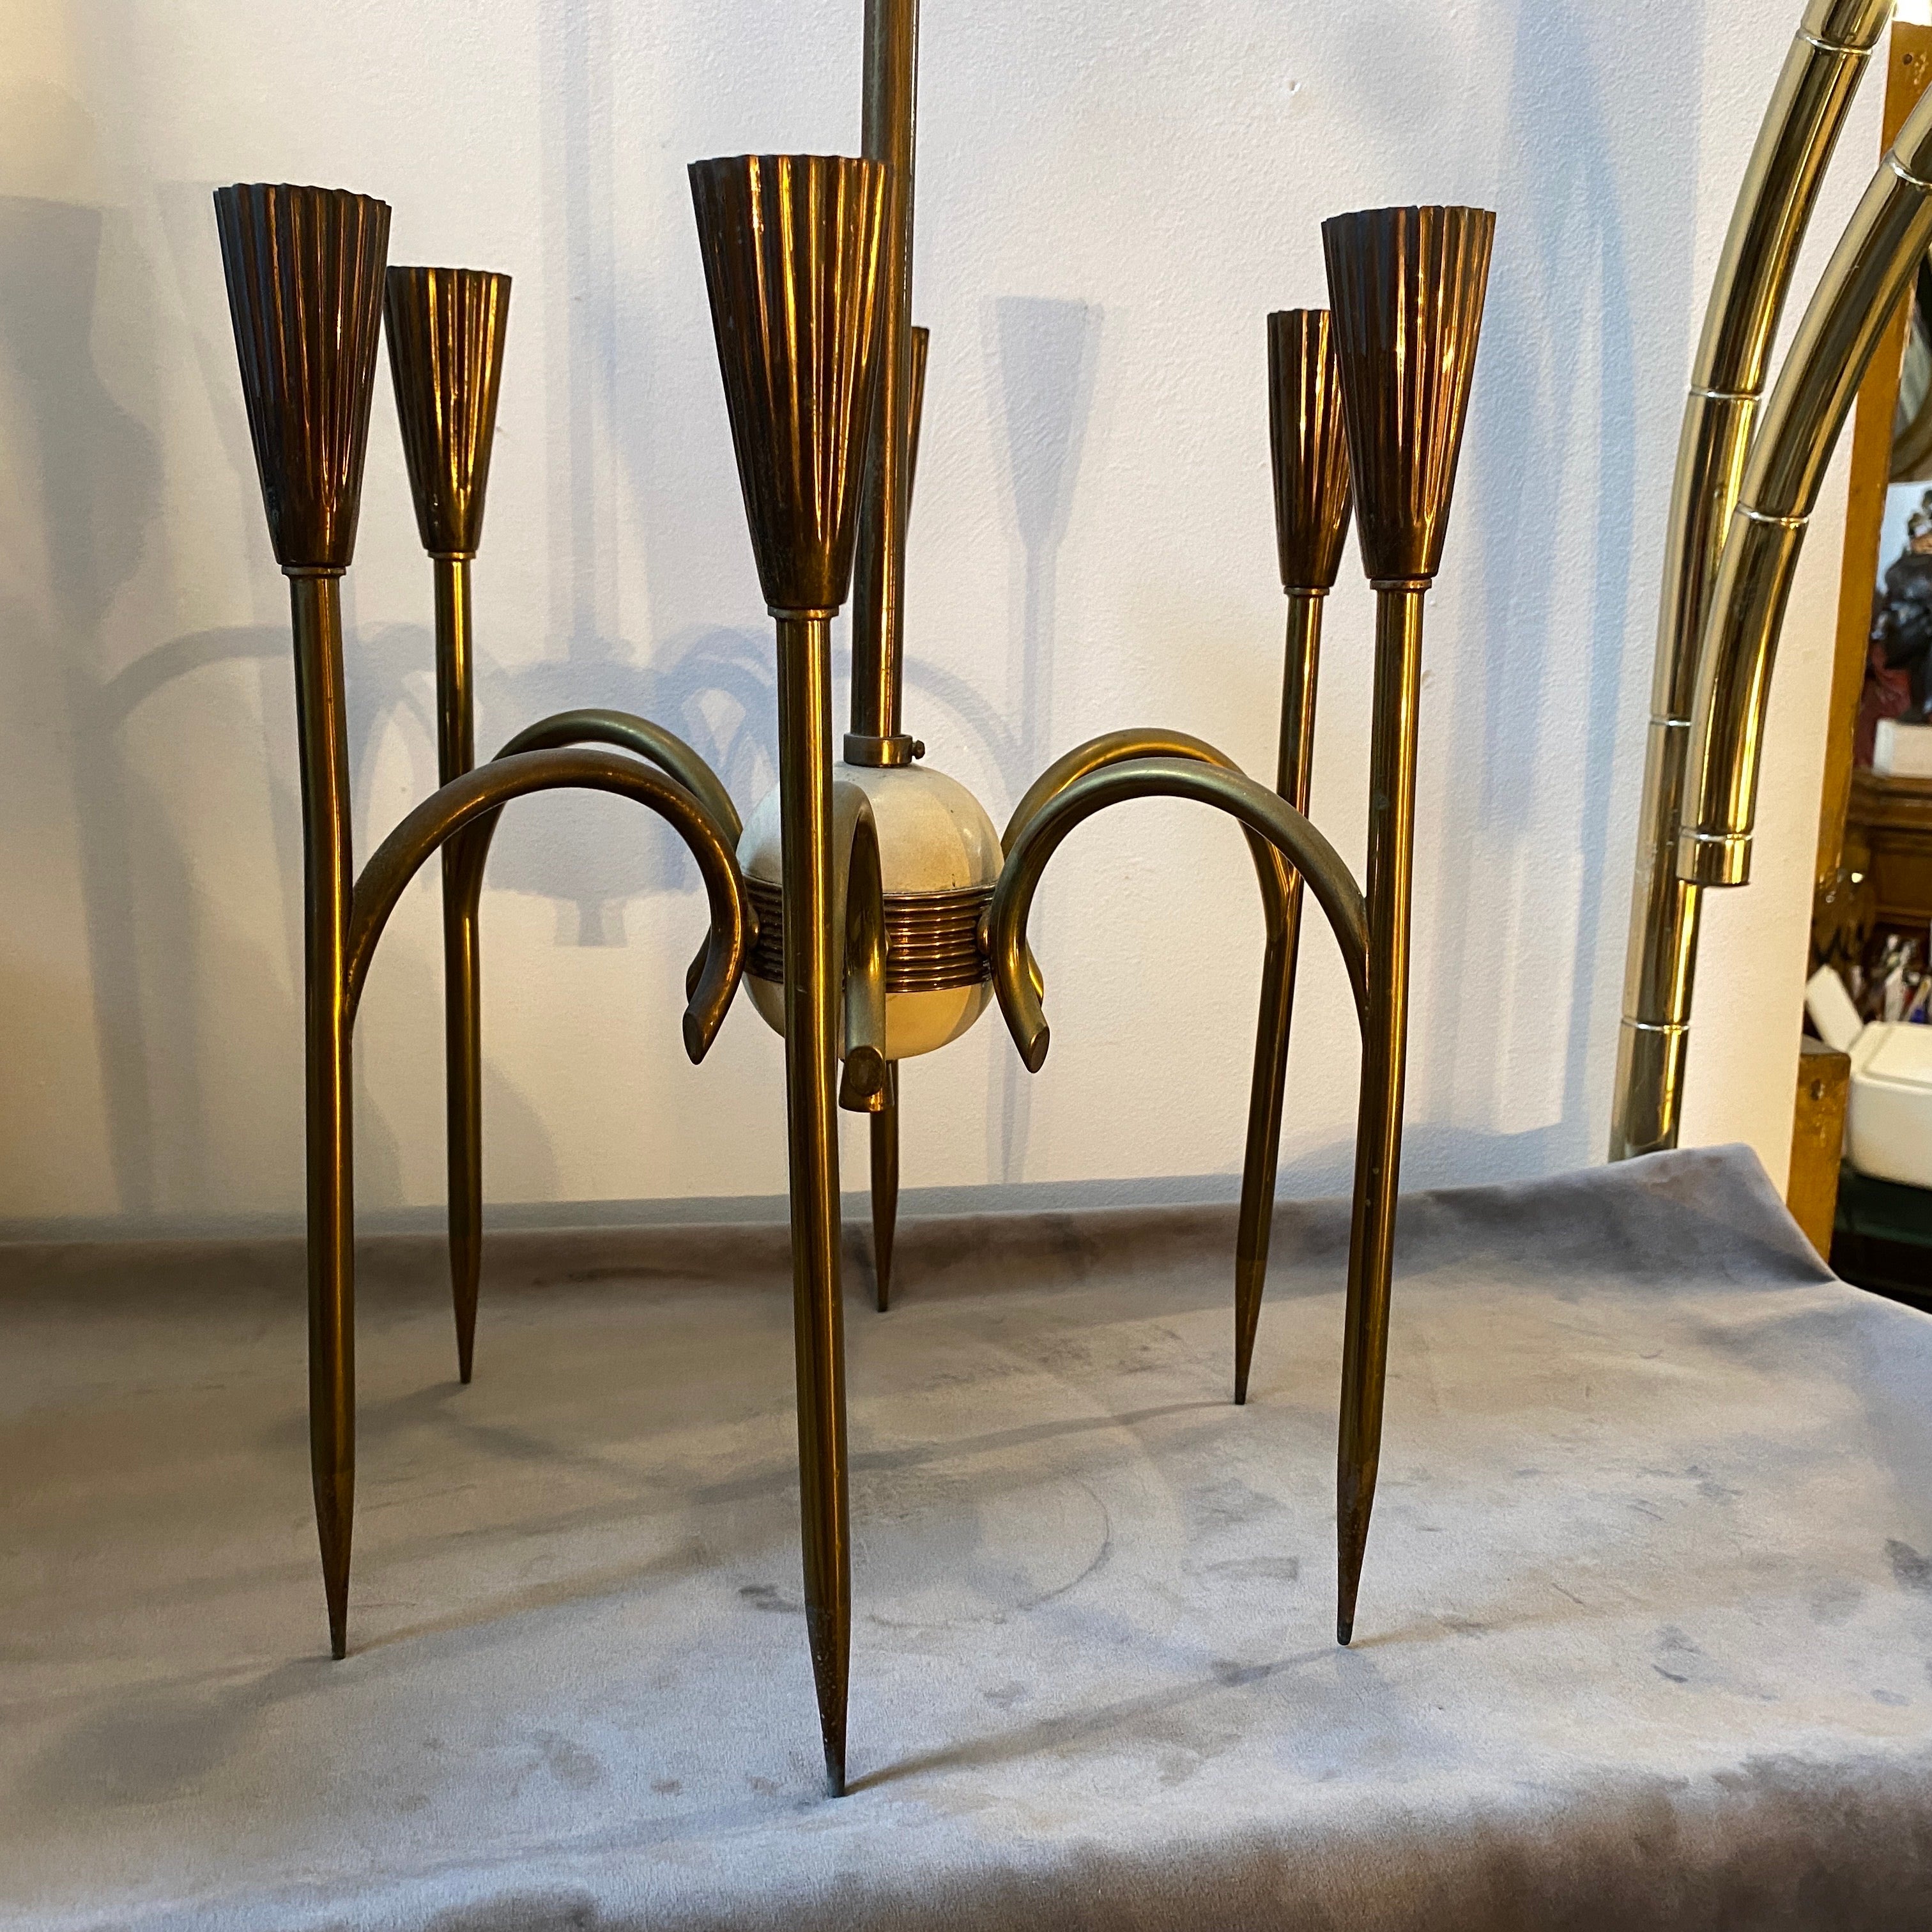 An elegant Mid-Century Modern brass chandelier designed and manufactured in Italy in the Fifties. High quality solid brass and the cleanliness of its line remembers design of Oscar Torlasco. It works both 110-240 volts and needs six regular e14